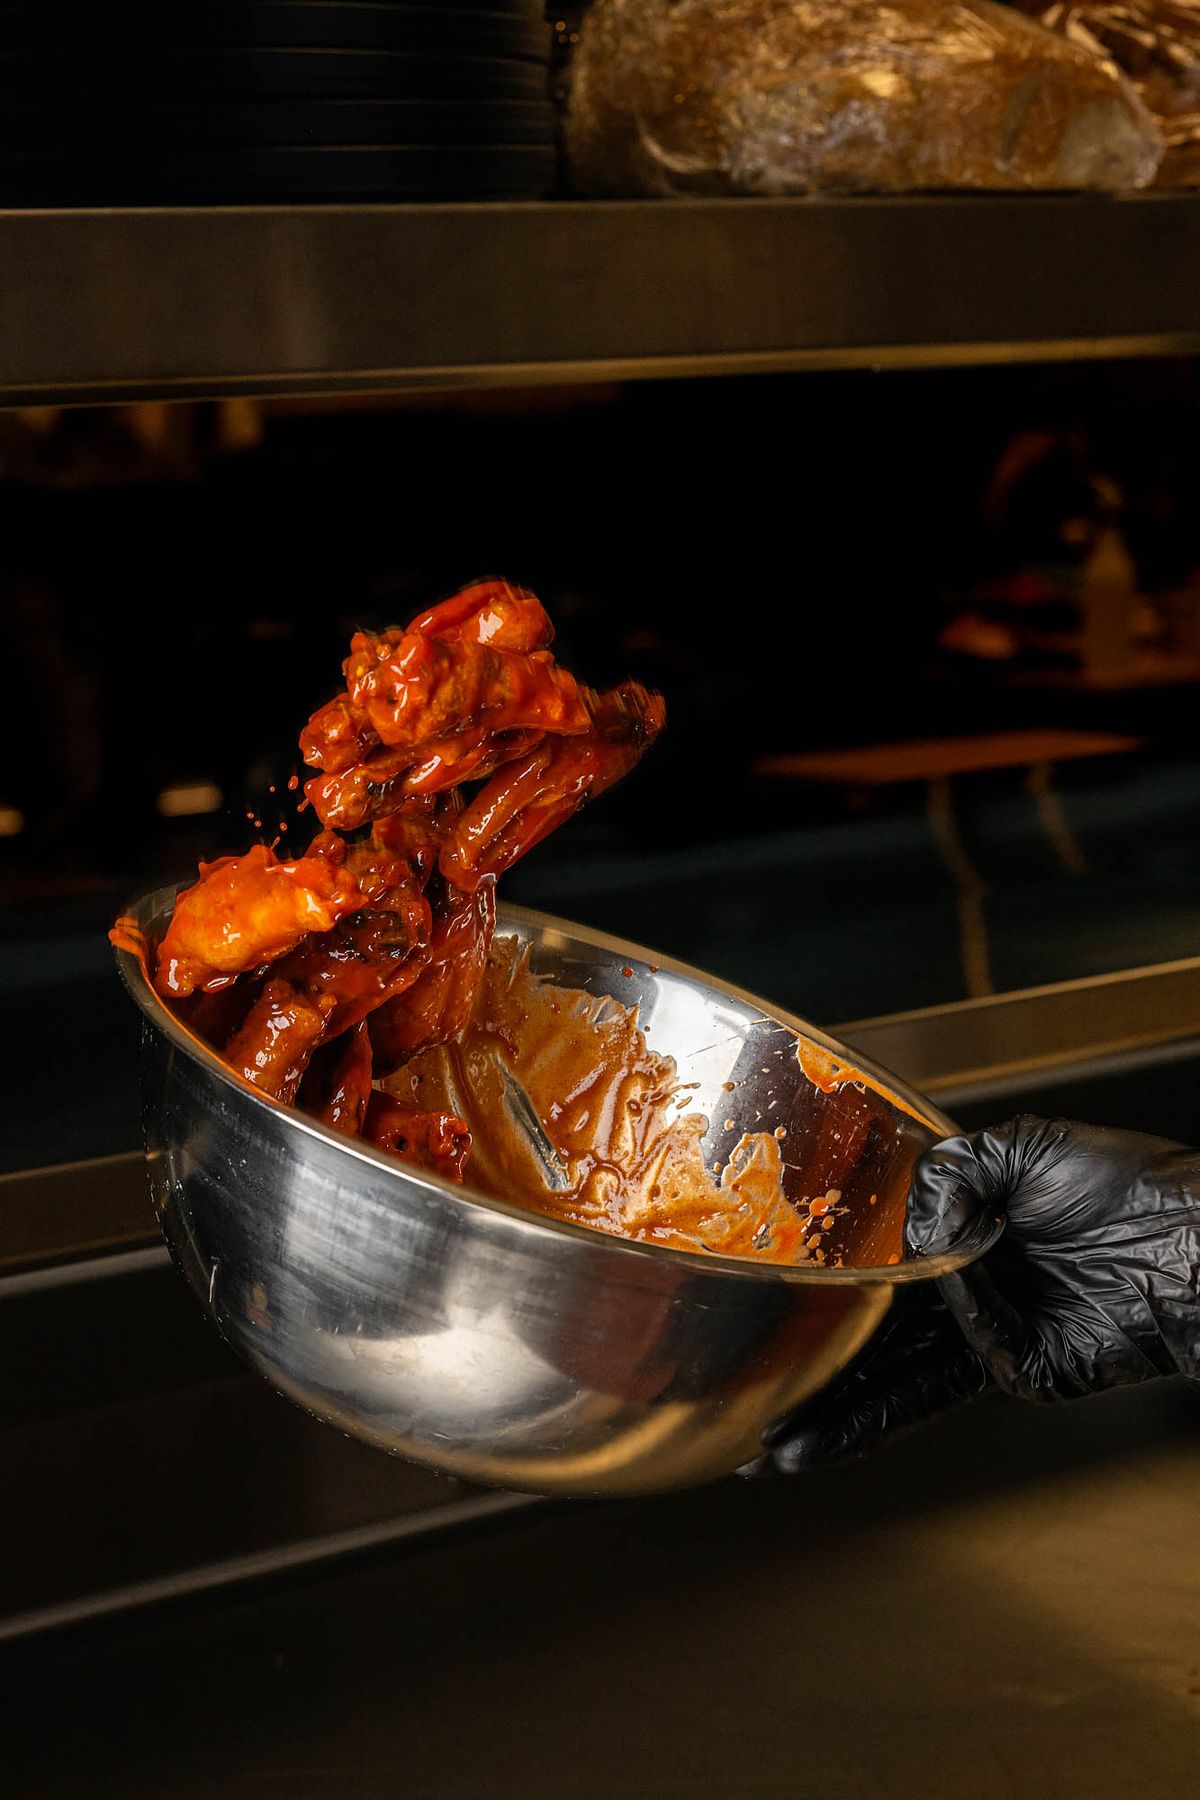 A chef tosses wings in a sauce using a steel bowl.